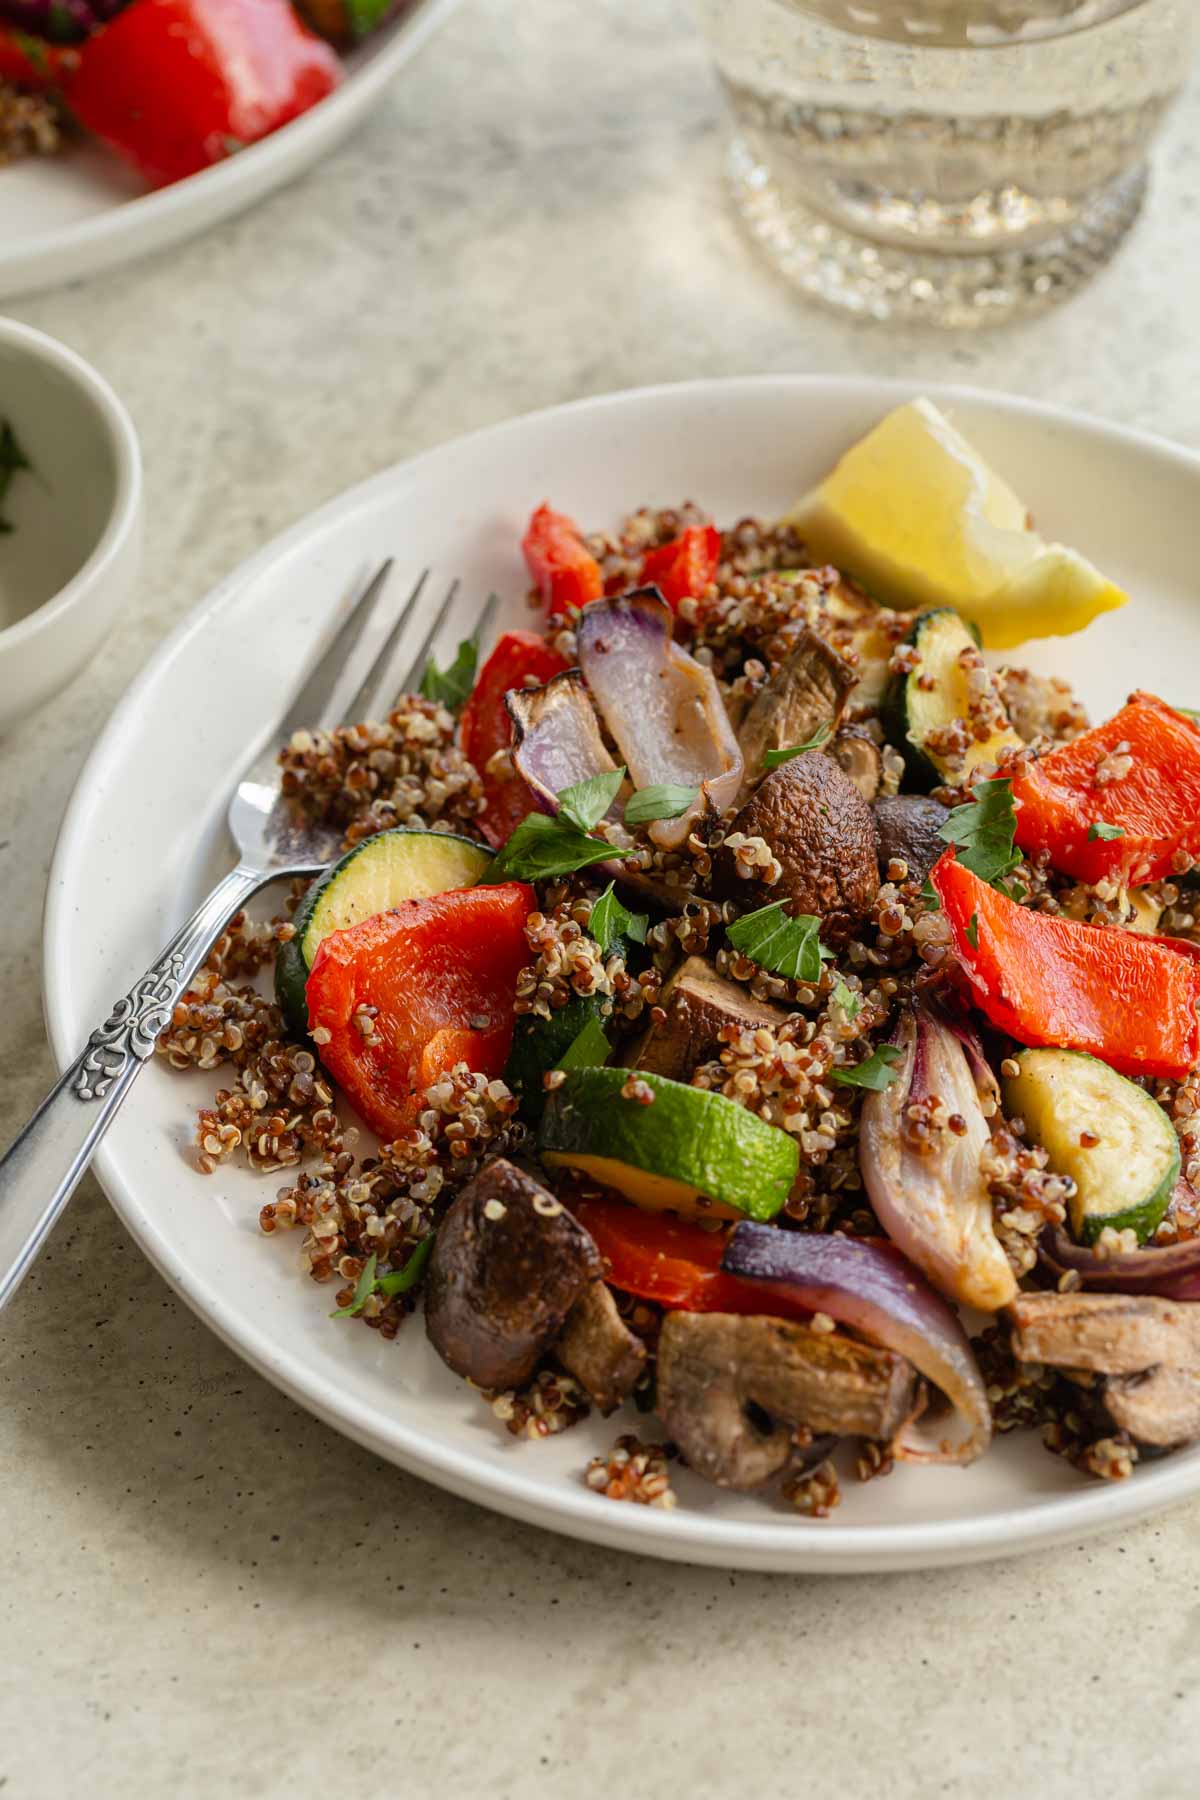 Roasted vegetables mixed with quinoa on a white plate with a fork.